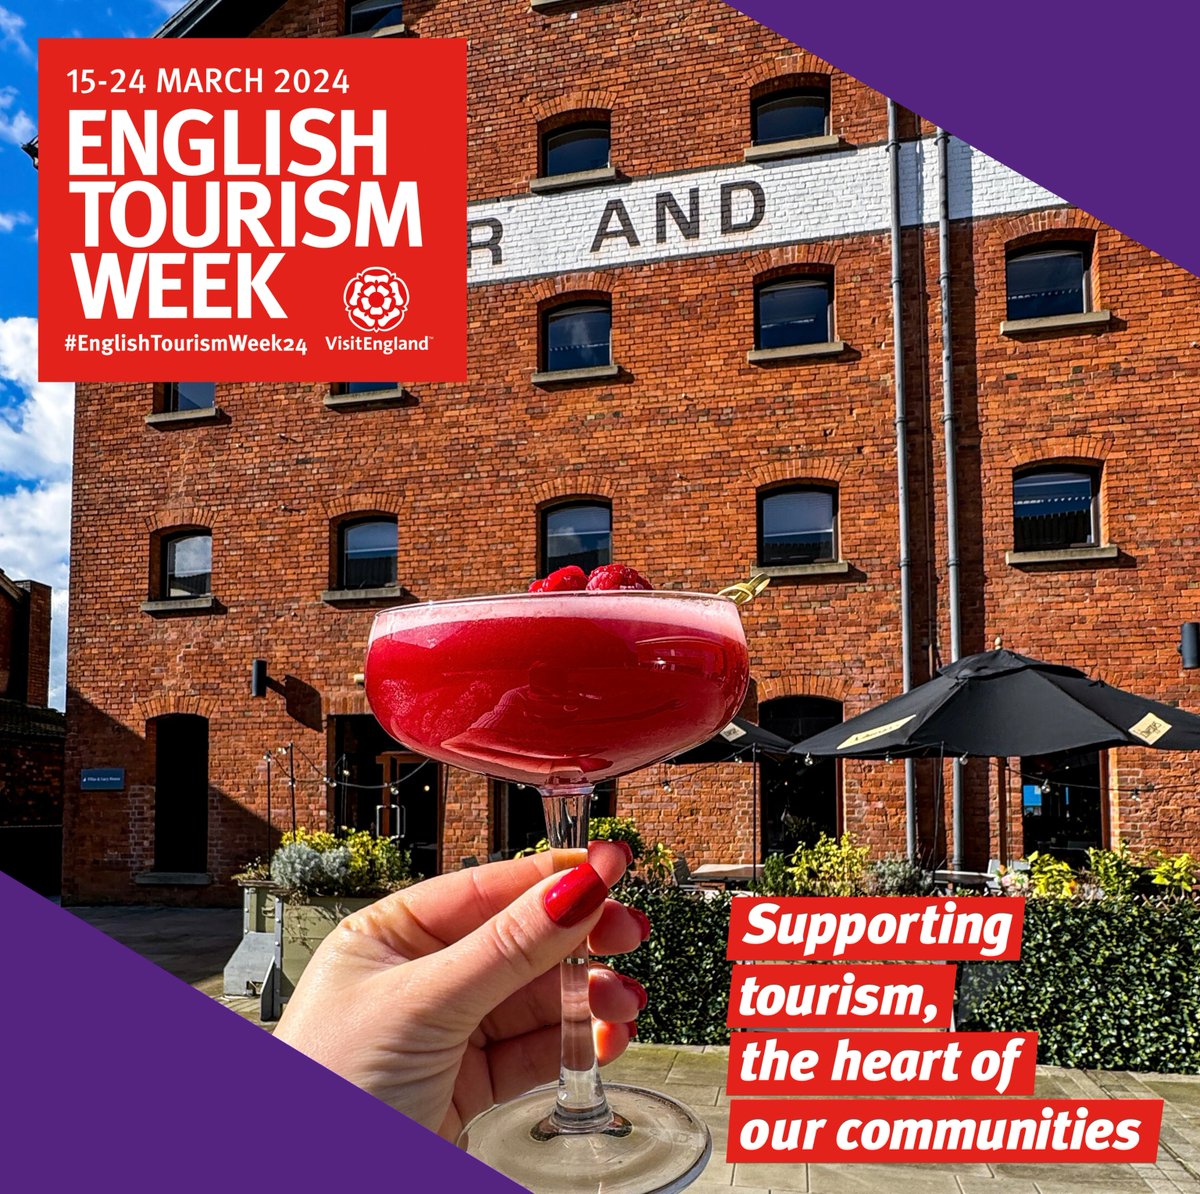 Coal Kitchen can be found at Gloucester Quays, open daily serving fresh meals from breakfast through to dinner, and innovative craft cocktails. Why not pop in for a bite today! coalkitchen.co.uk #EnglishTourismWeek24